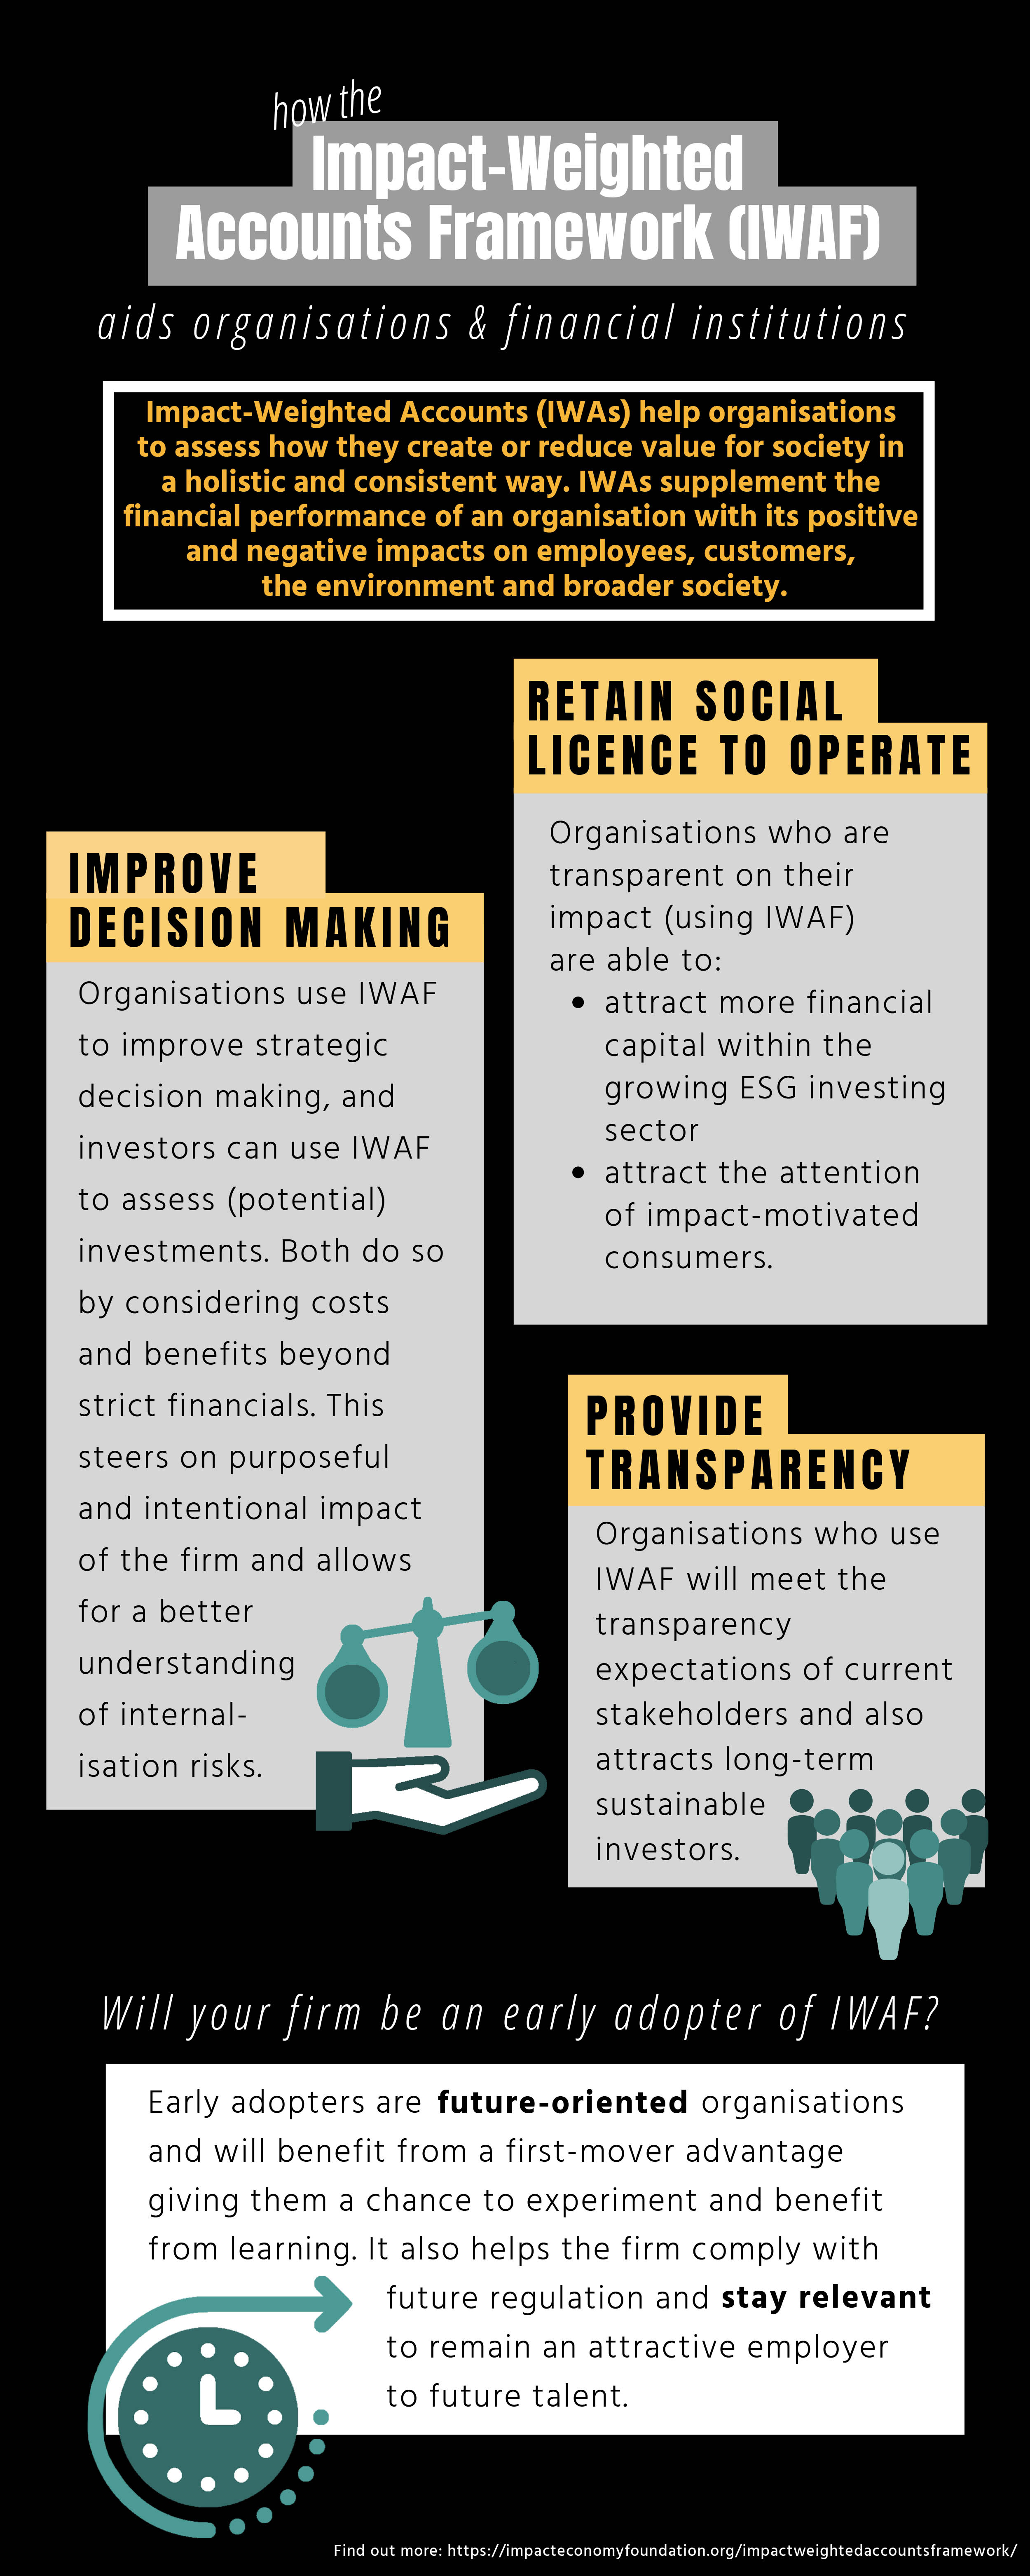 Why is IWAF Important for Organisations & Financial Institutions?